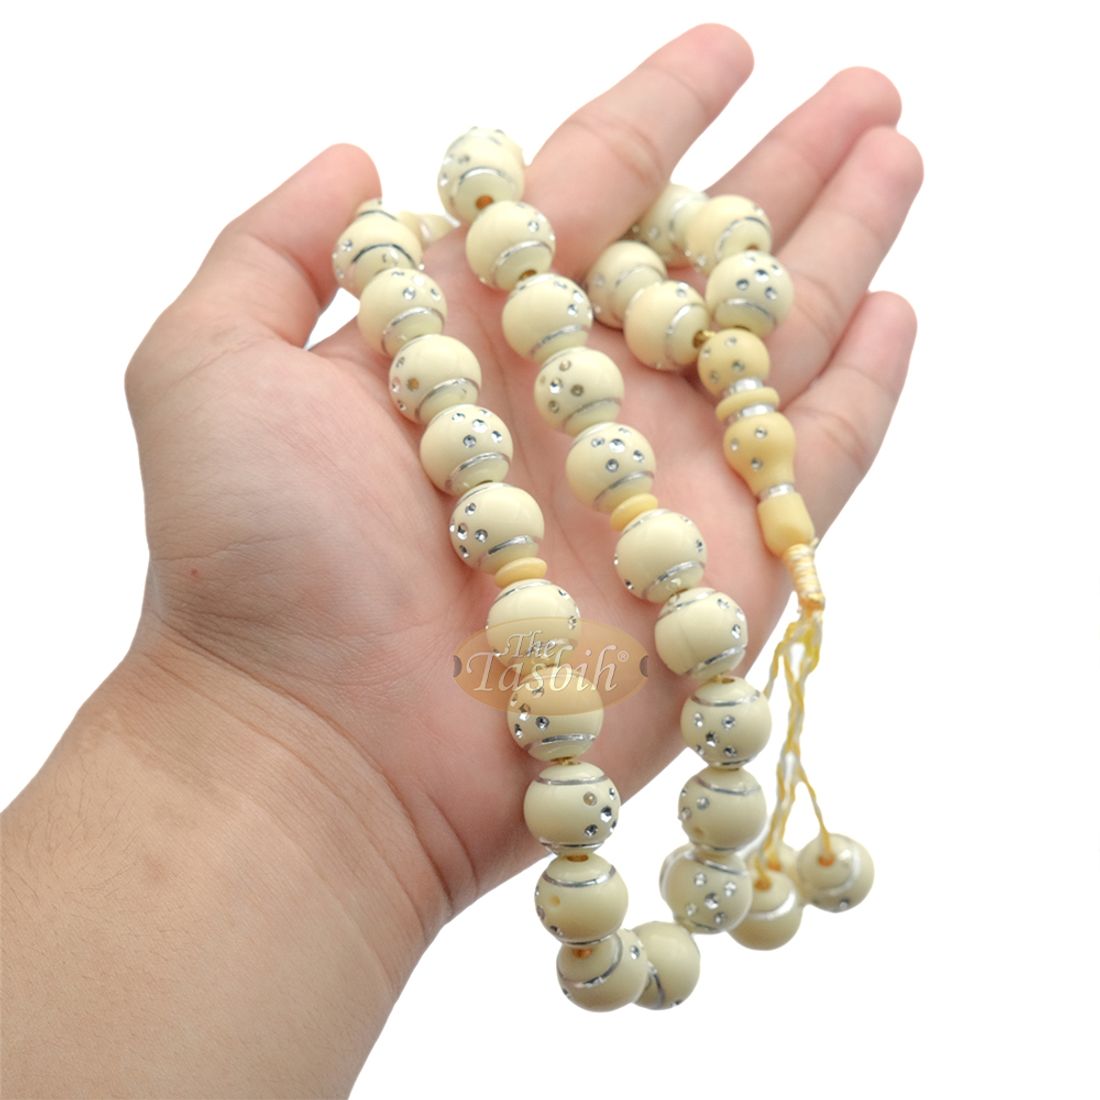 Beige and Silver Domino Design 14mm Round 33 bead with 2 small dividers and 4 Bead Tassel Plastic Tasbih